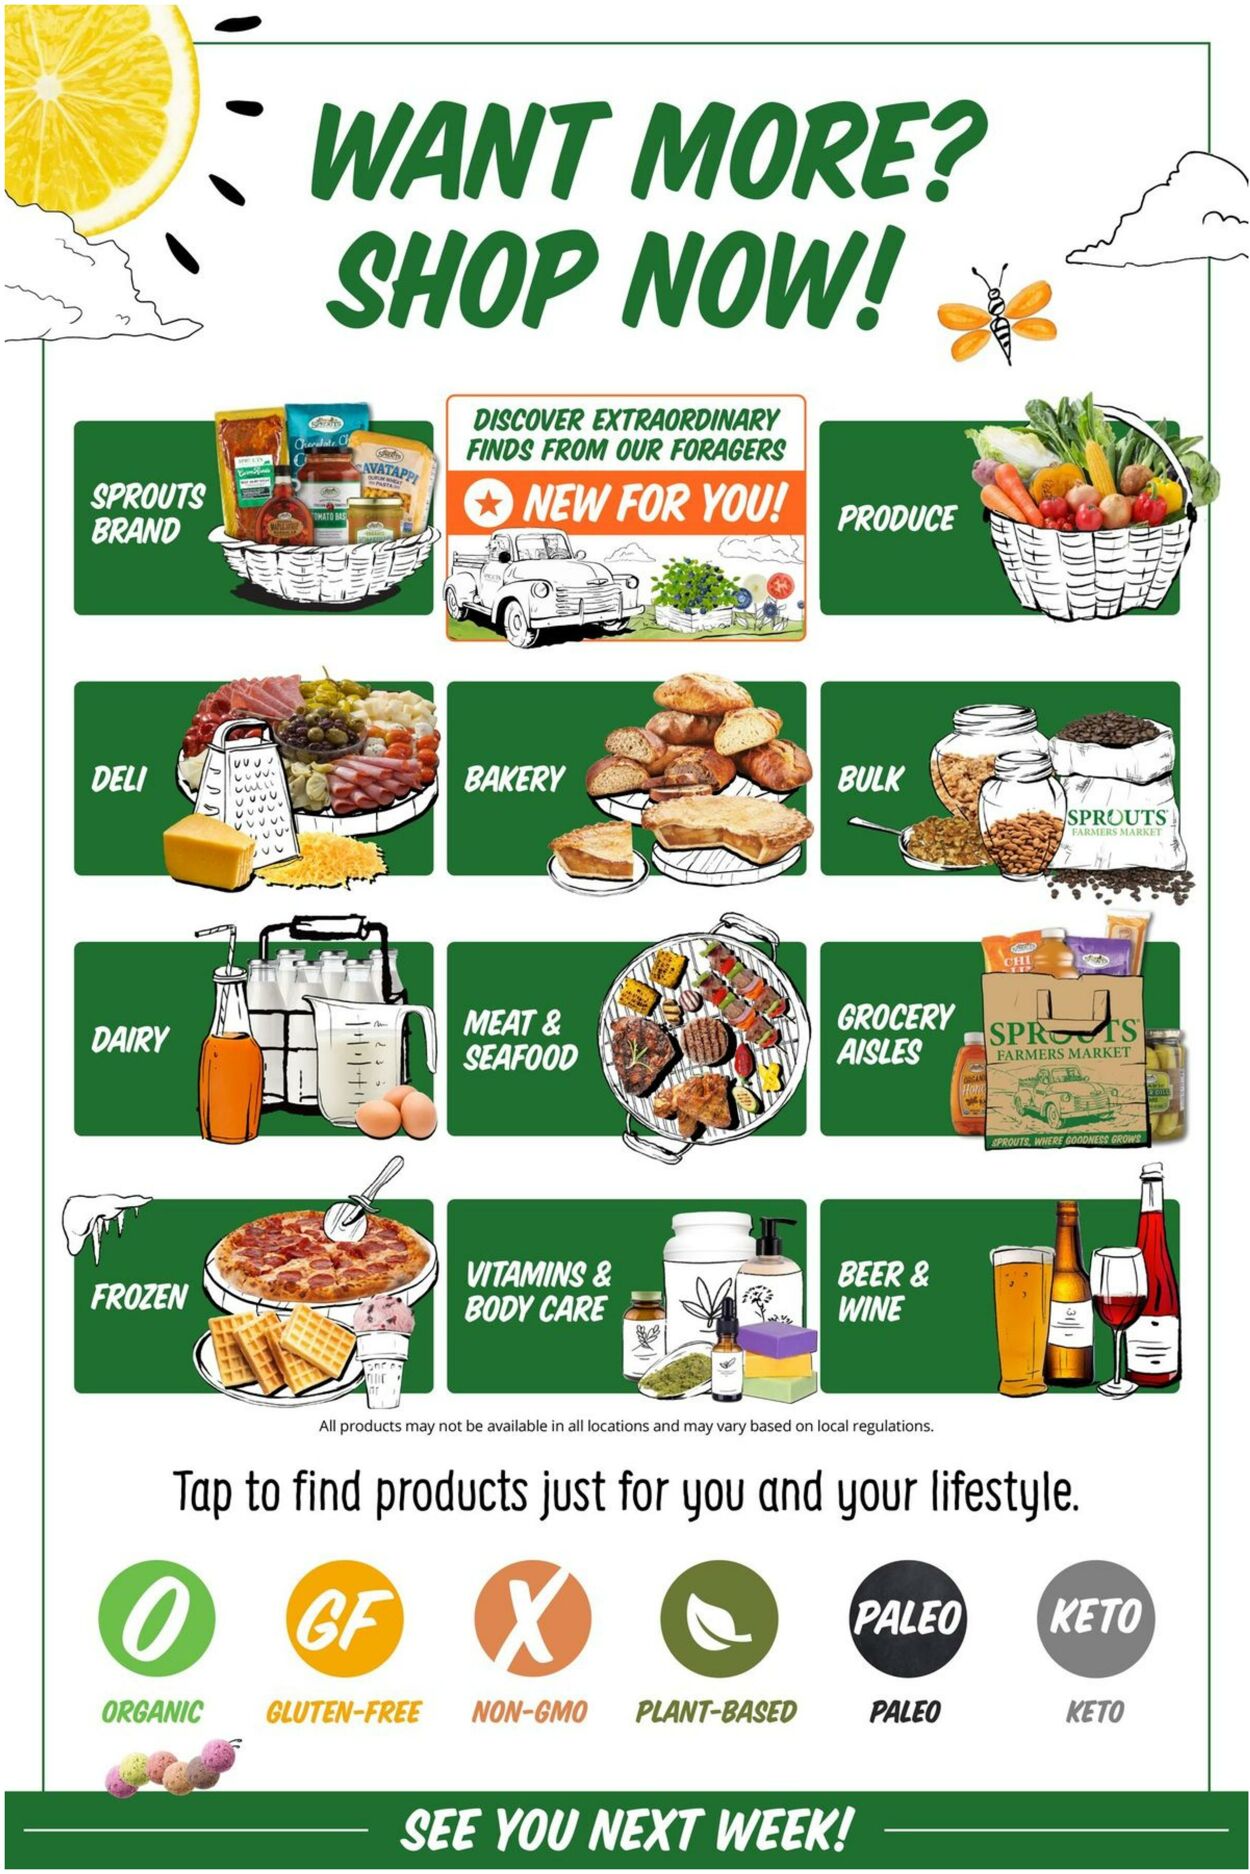 Weekly ad Sprouts 04/26/2023 - 05/02/2023